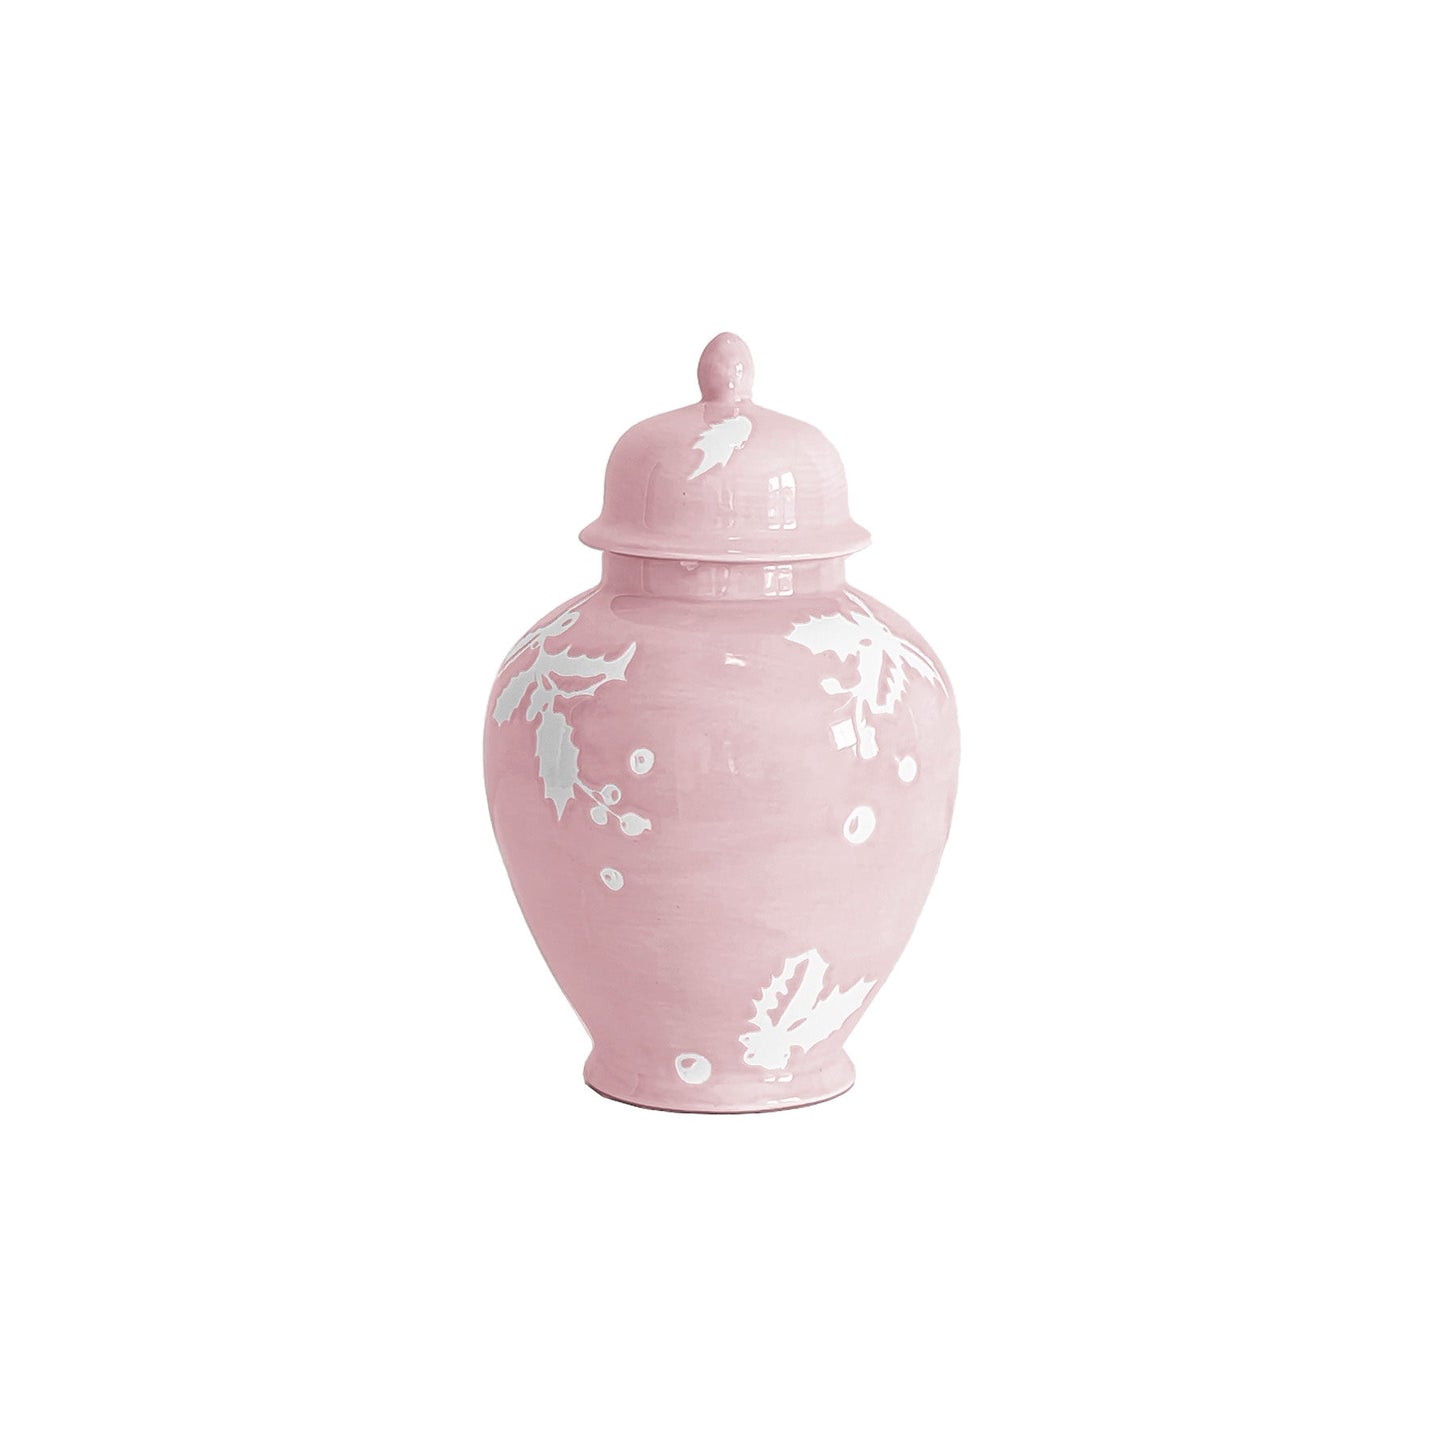 Deck the Halls Ginger Jars in Cherry Blossom Pink | Wholesale